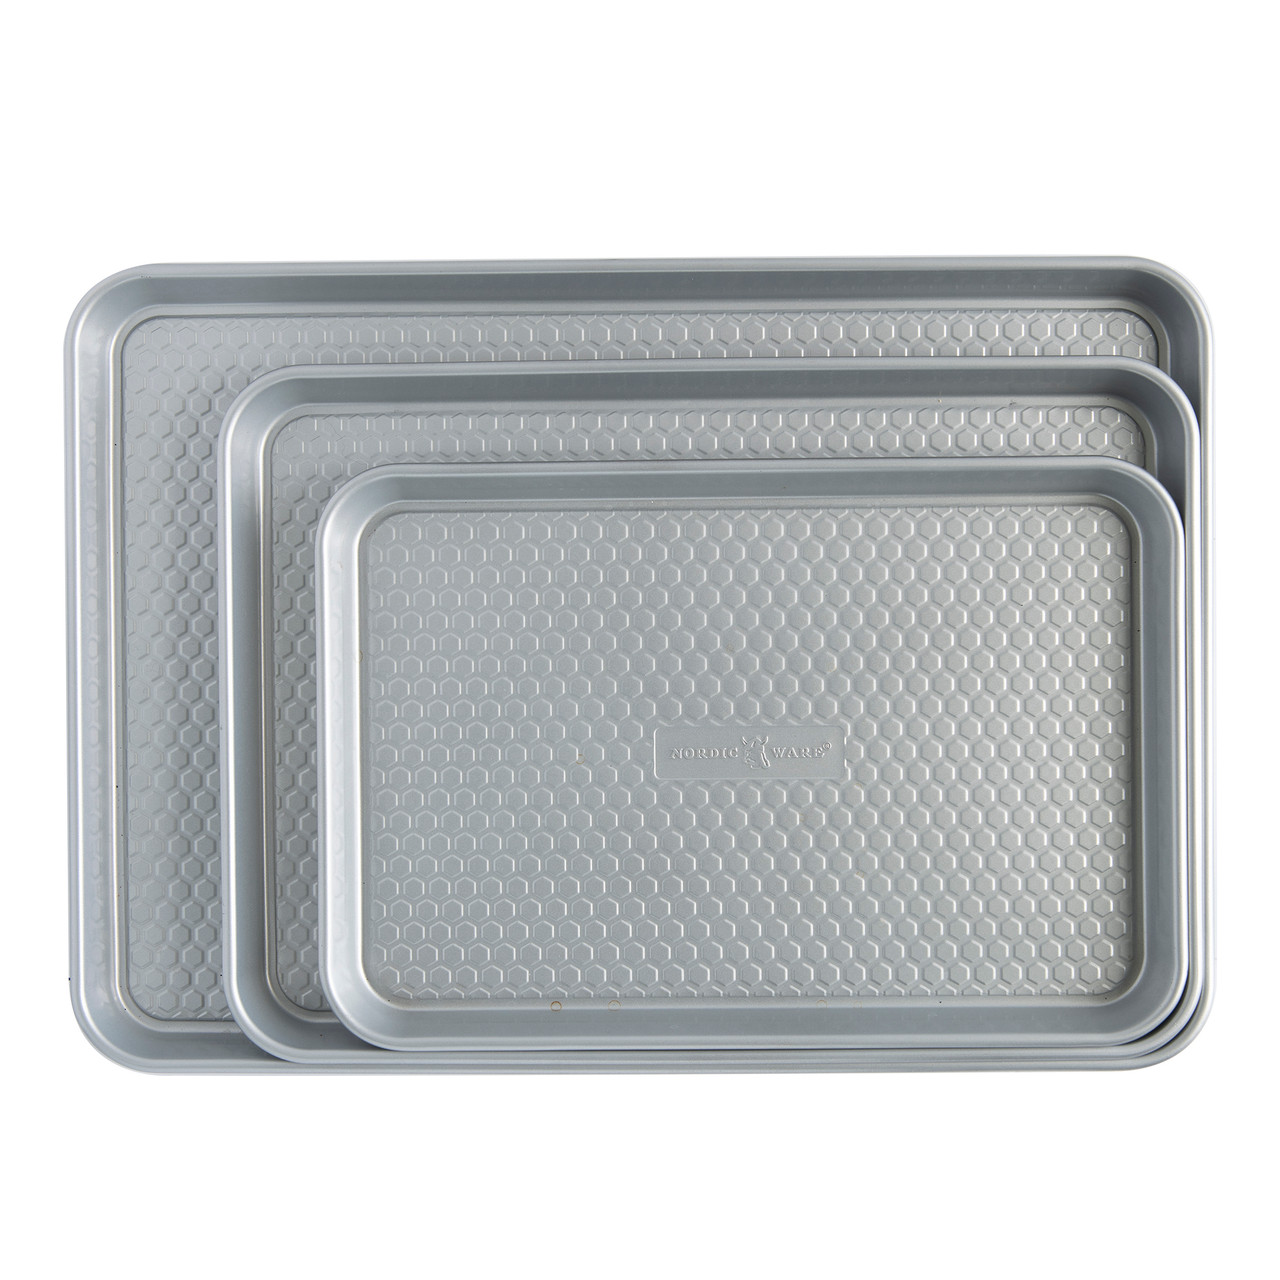 Nordic Ware 3 Pack Baking Sheet Set Silver, 3 - Fry's Food Stores